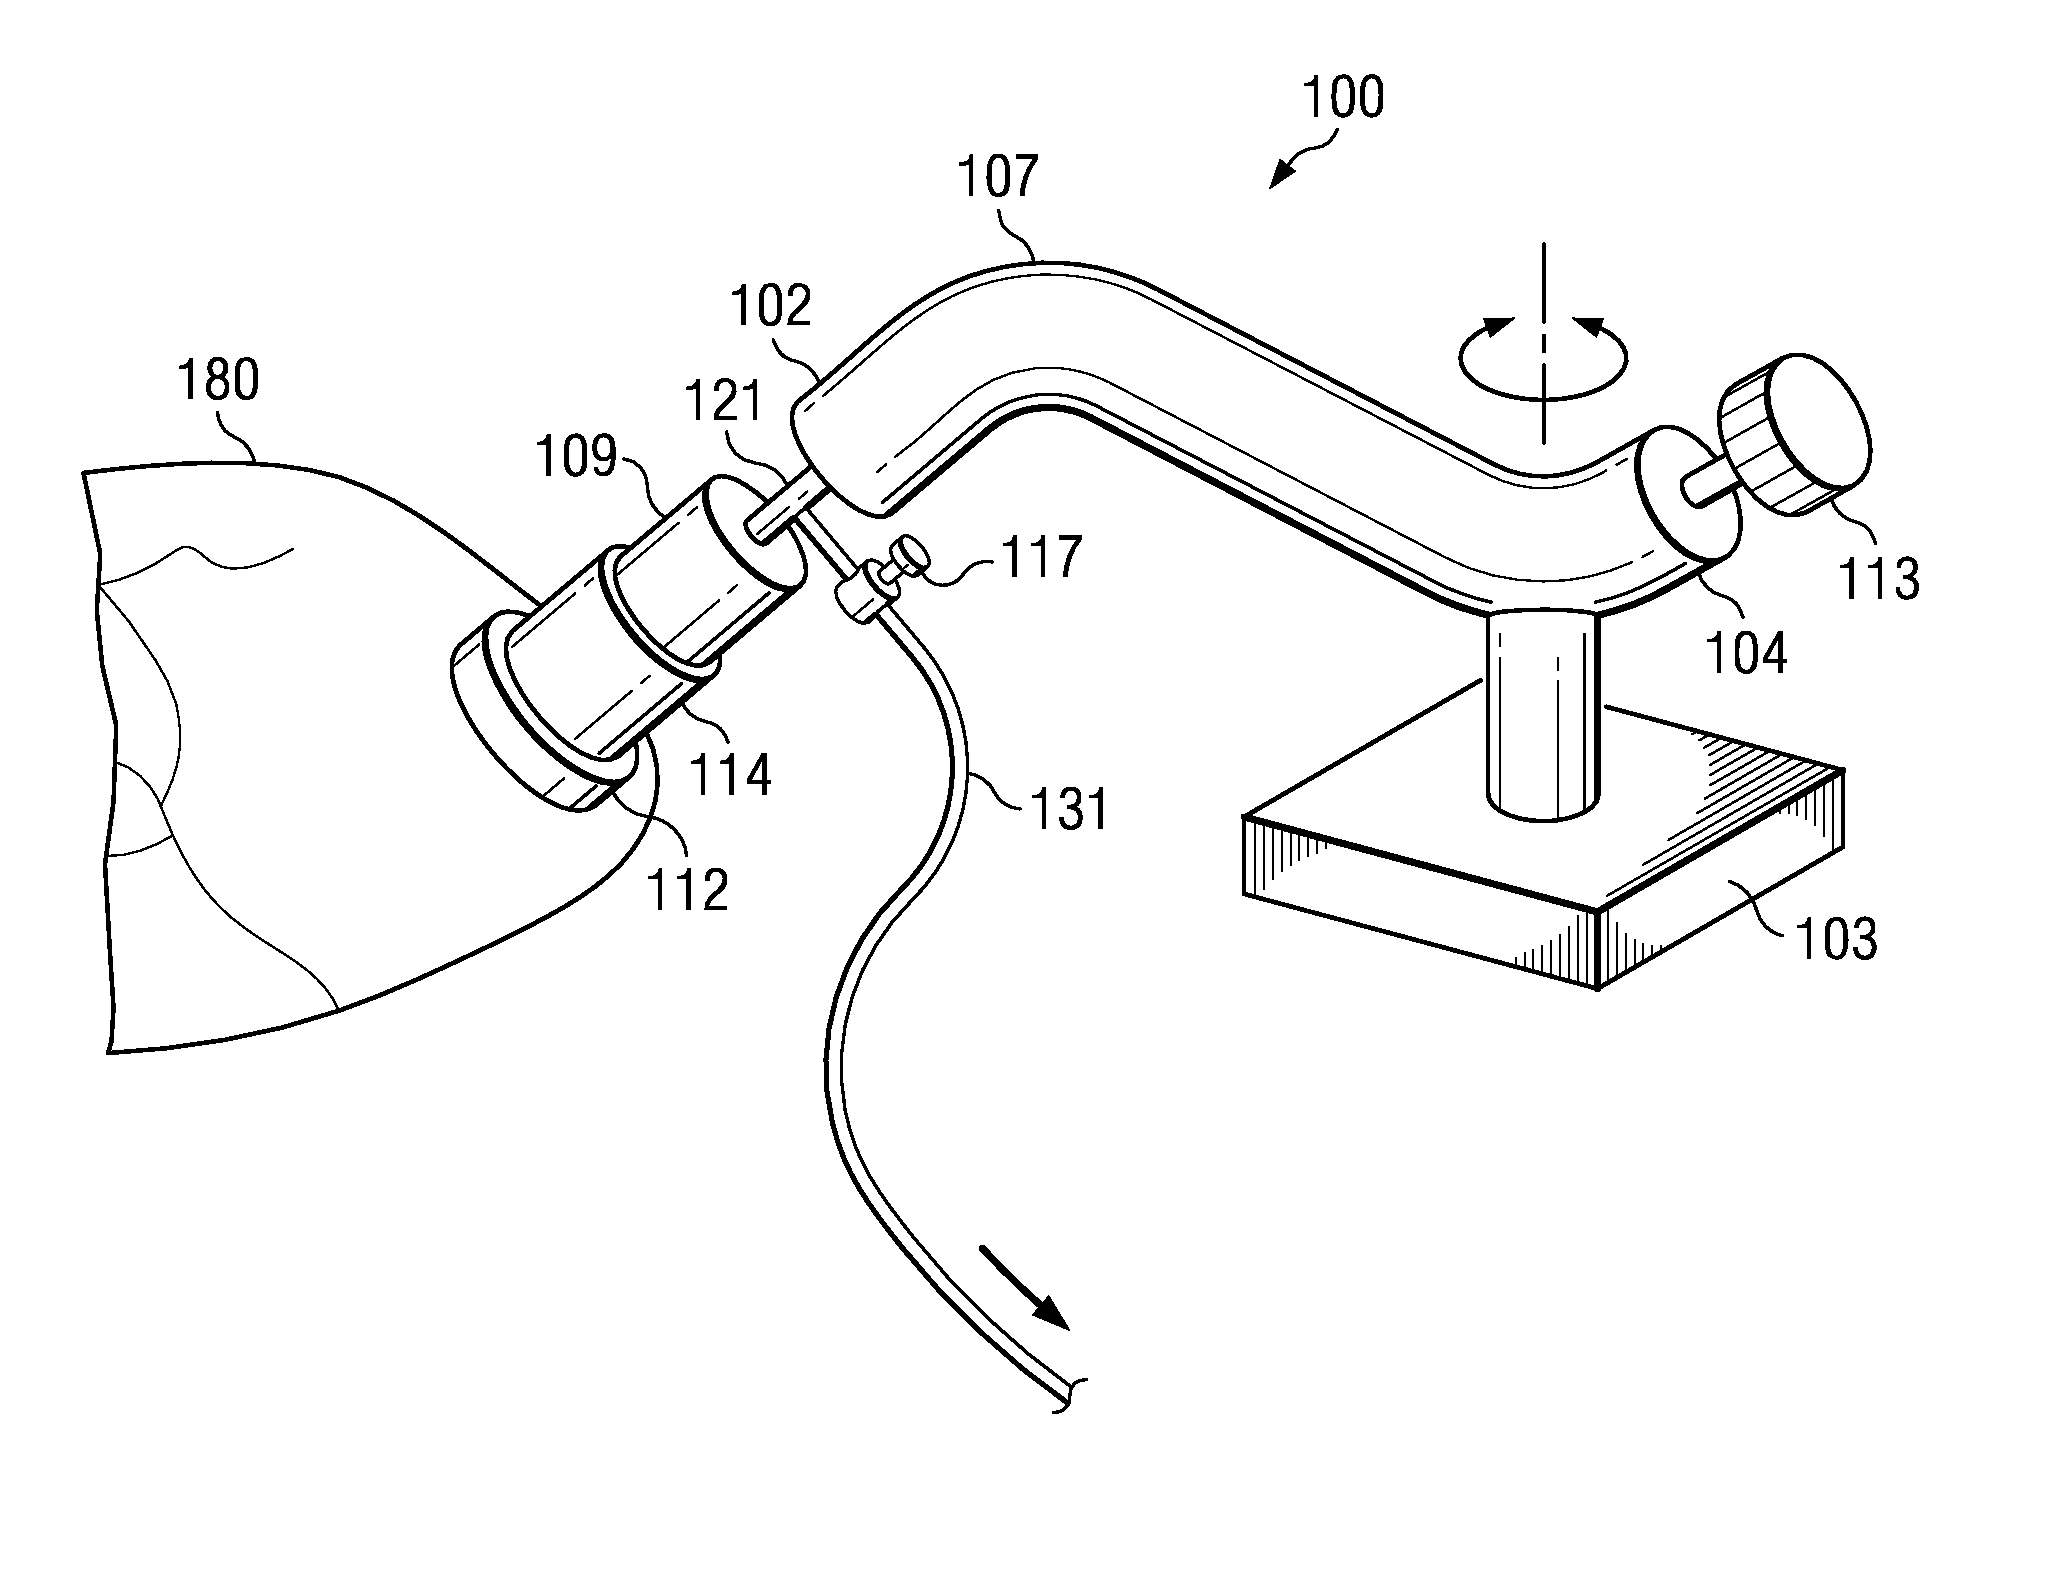 Method and apparatus for stabilization and positioning during surgery